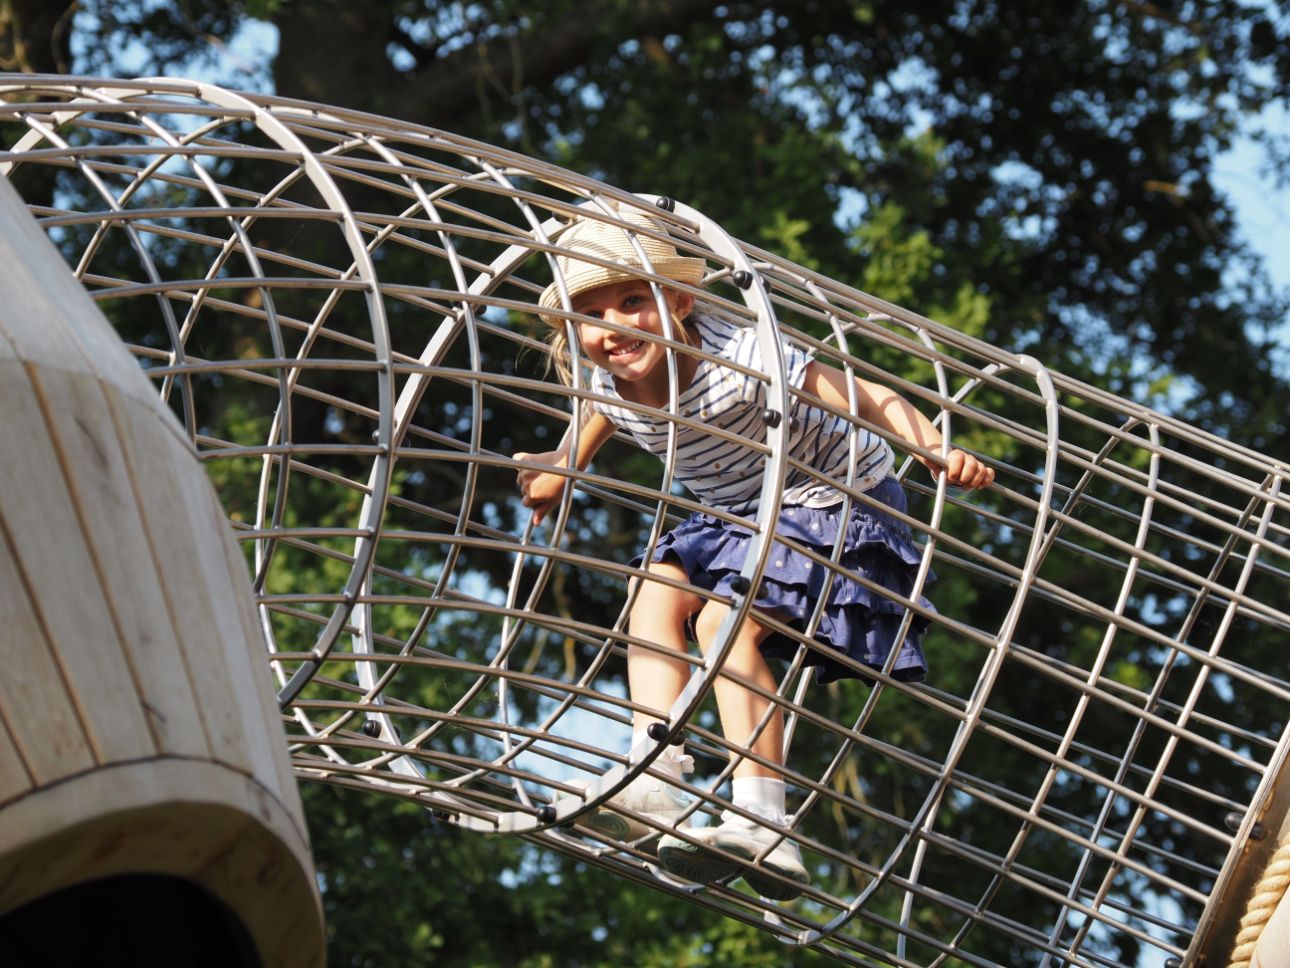 Young child climbing through a wire frame.